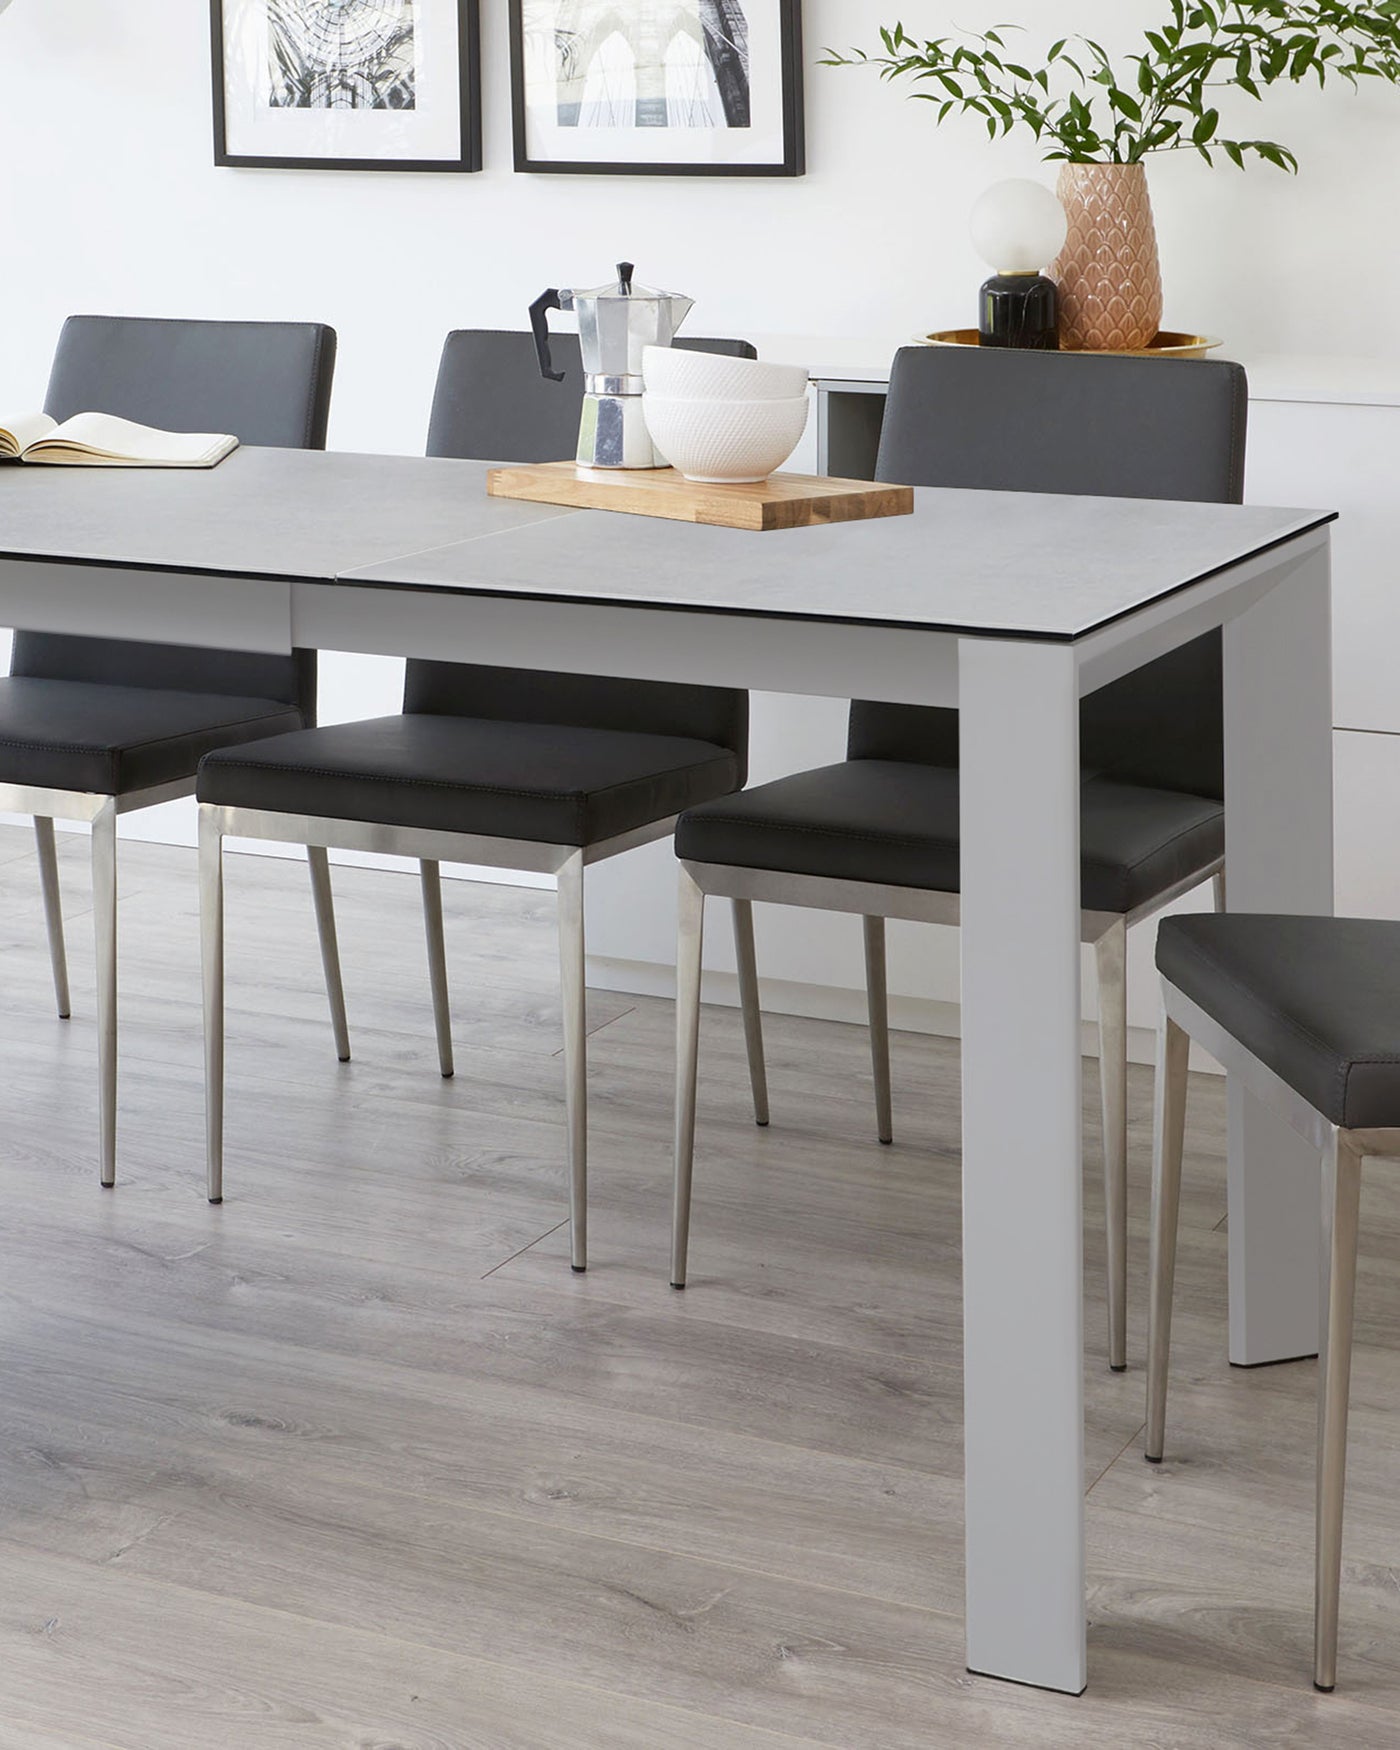 Modern minimalist dining set comprising a rectangular table with a light grey surface and white legs, surrounded by six matching dark upholstered chairs with slim metal legs.